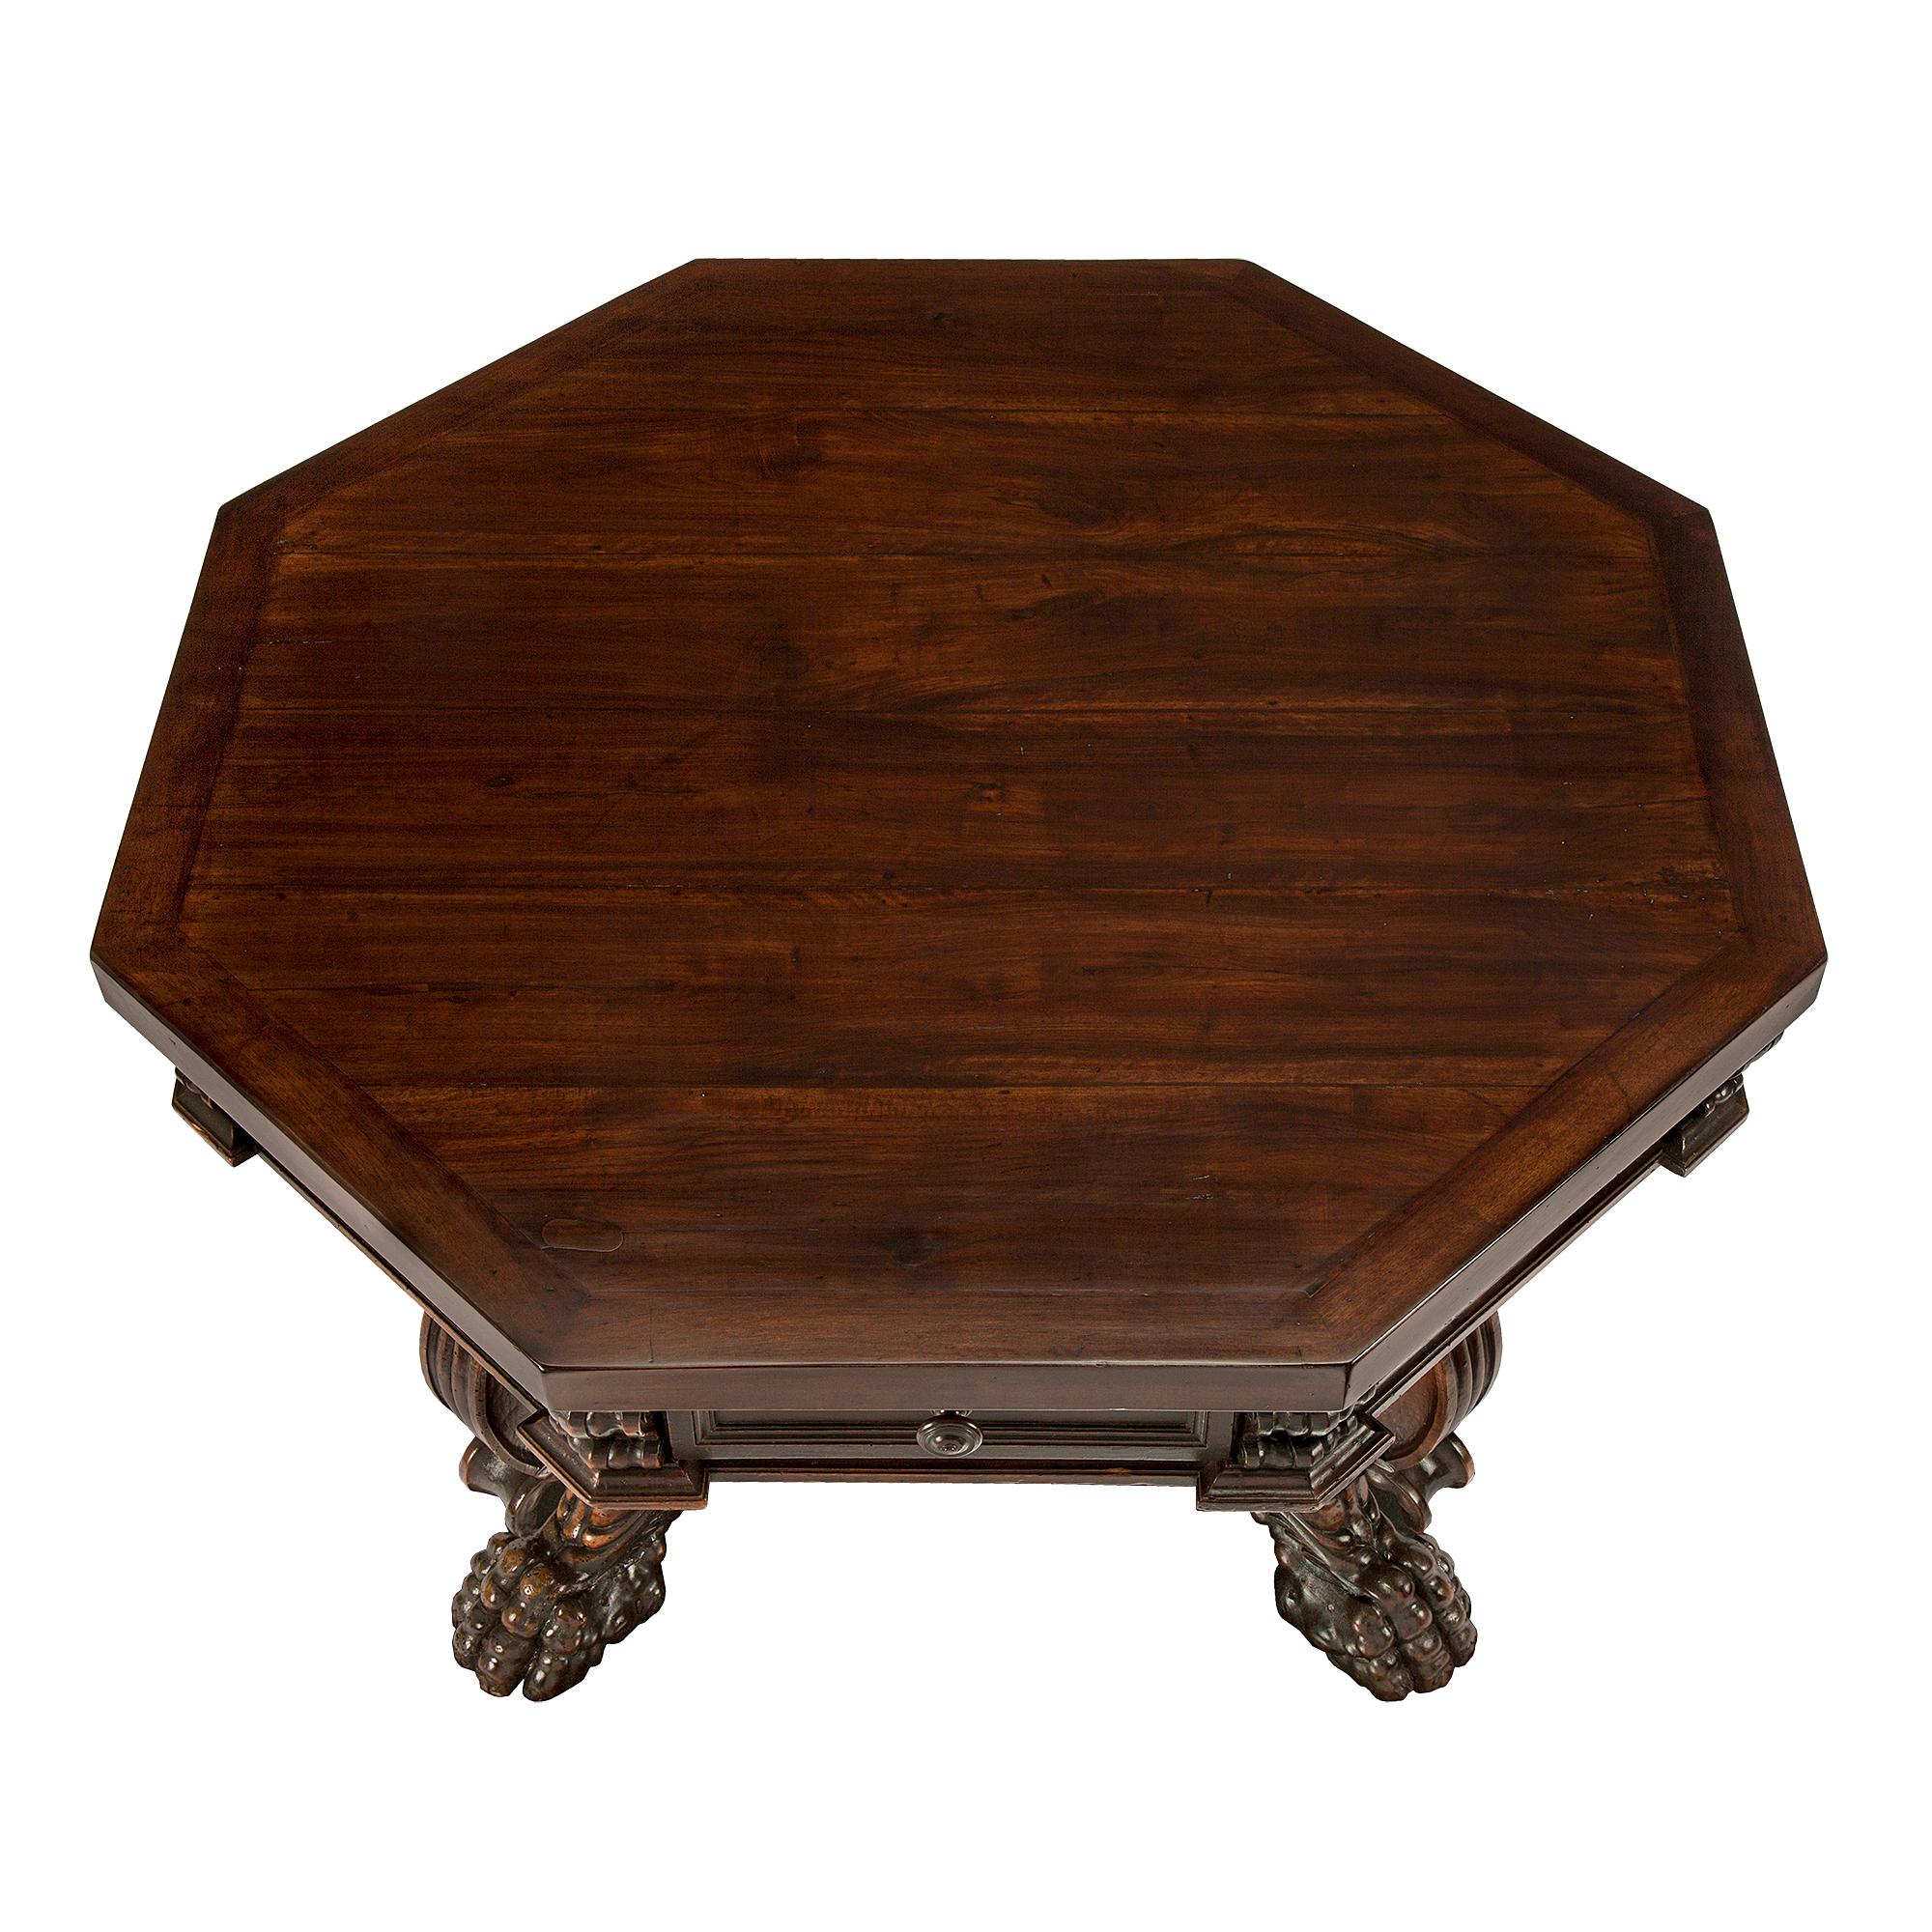 A handsome Italian 17th century Baroque period solid walnut octagonal center table. The table is raised by four wonderfully scrolled legs with richly carved paw feet and outstanding foliate designs, centered by a large inverted bottom finial. At the